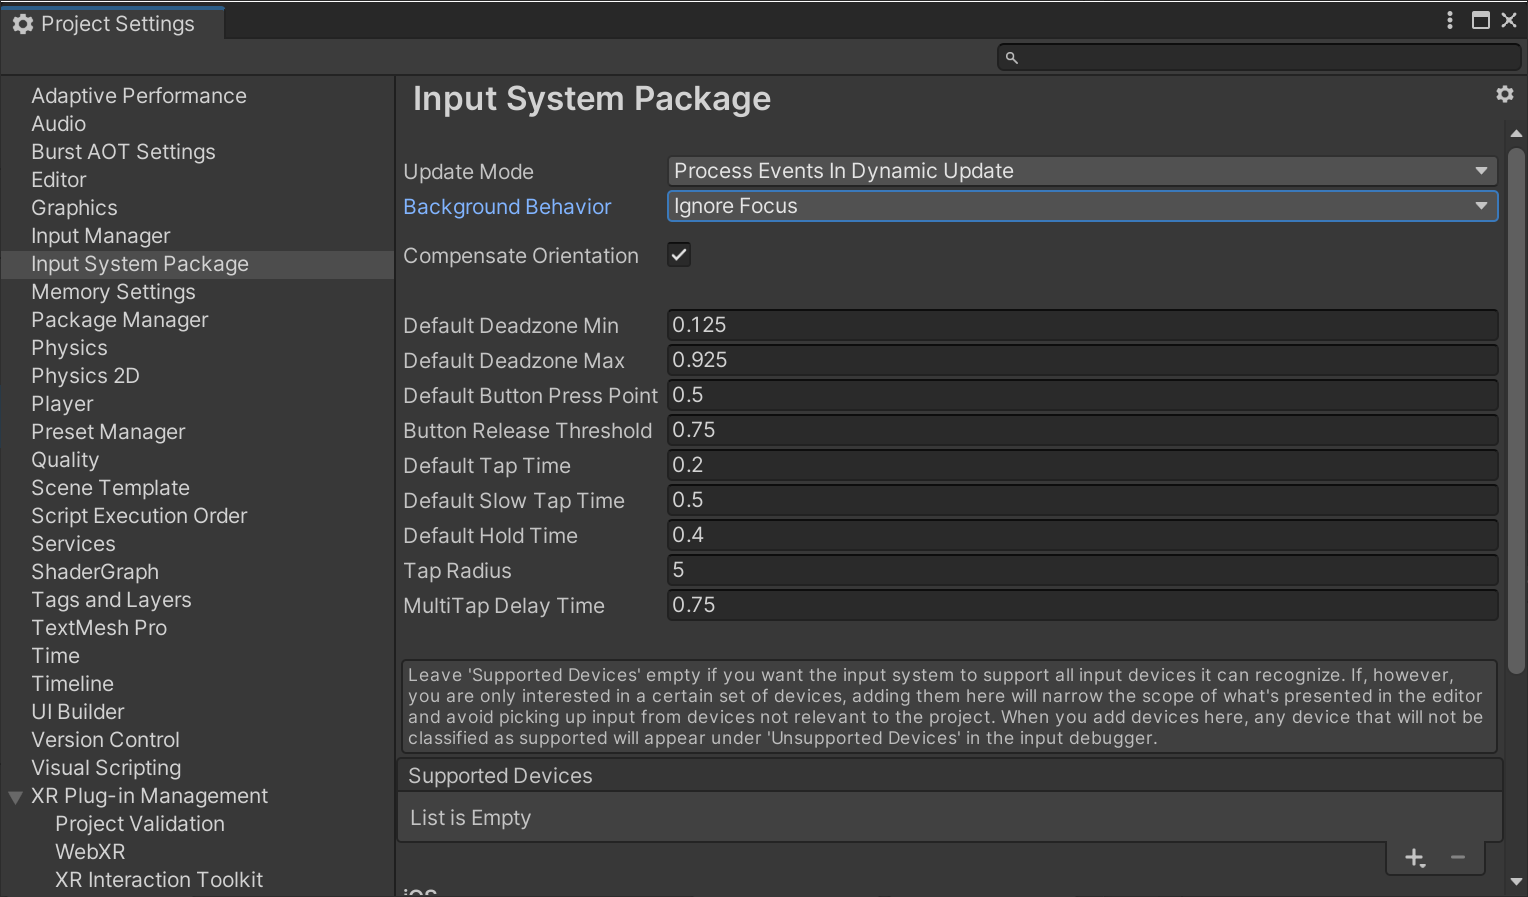 Input System Package settings